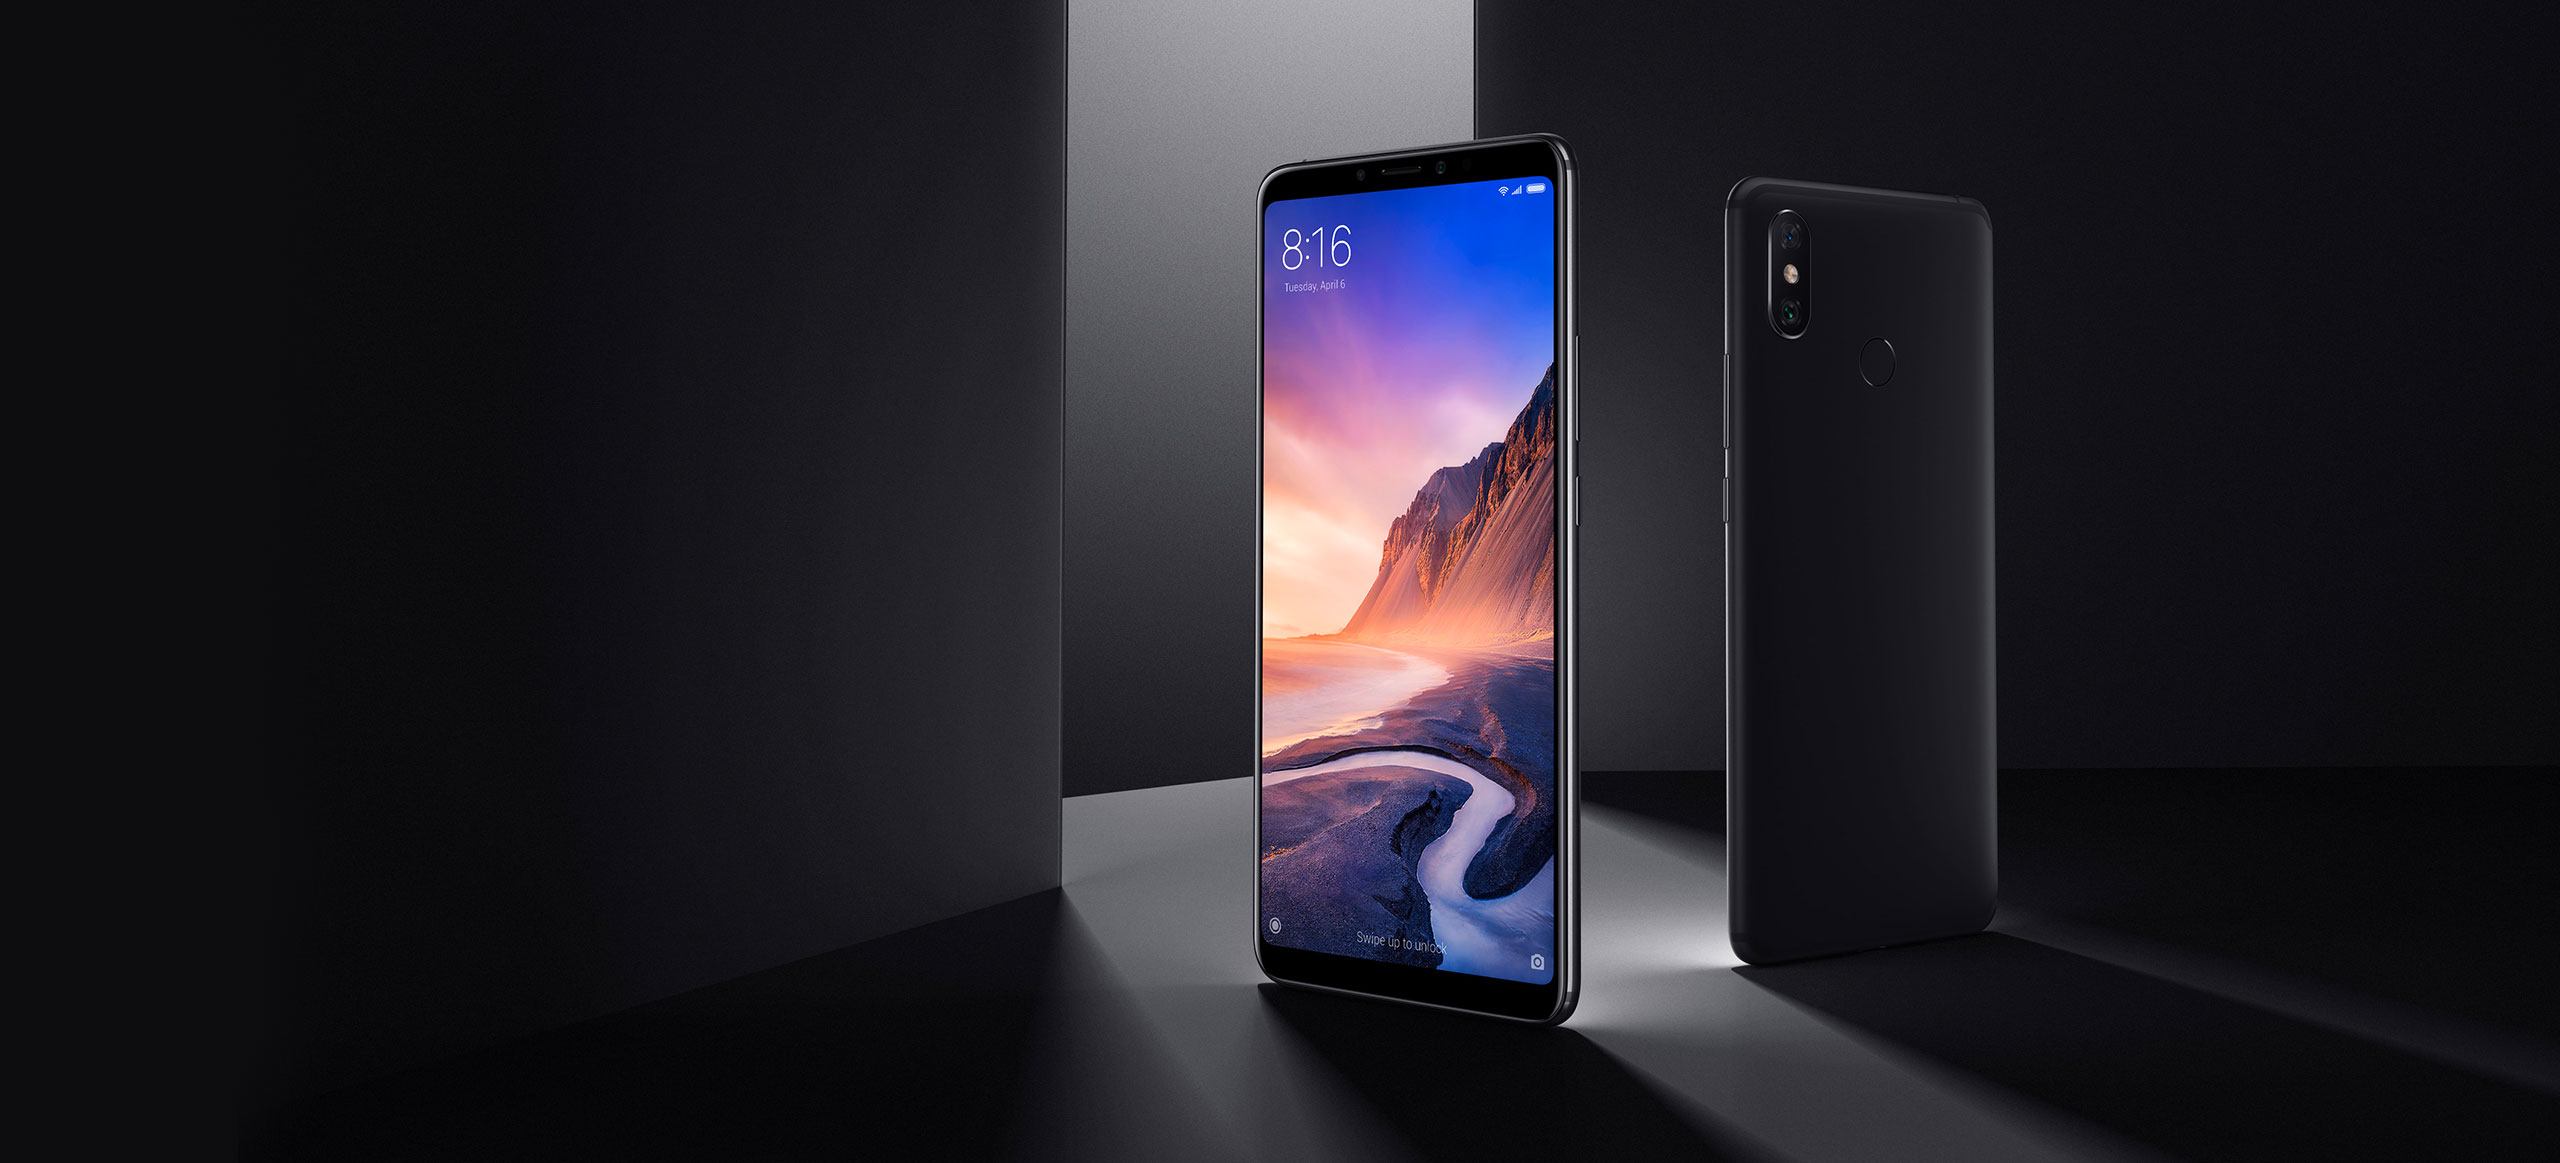 Mi Max 3 Android 9 Pie update (global stable) currently rolling out